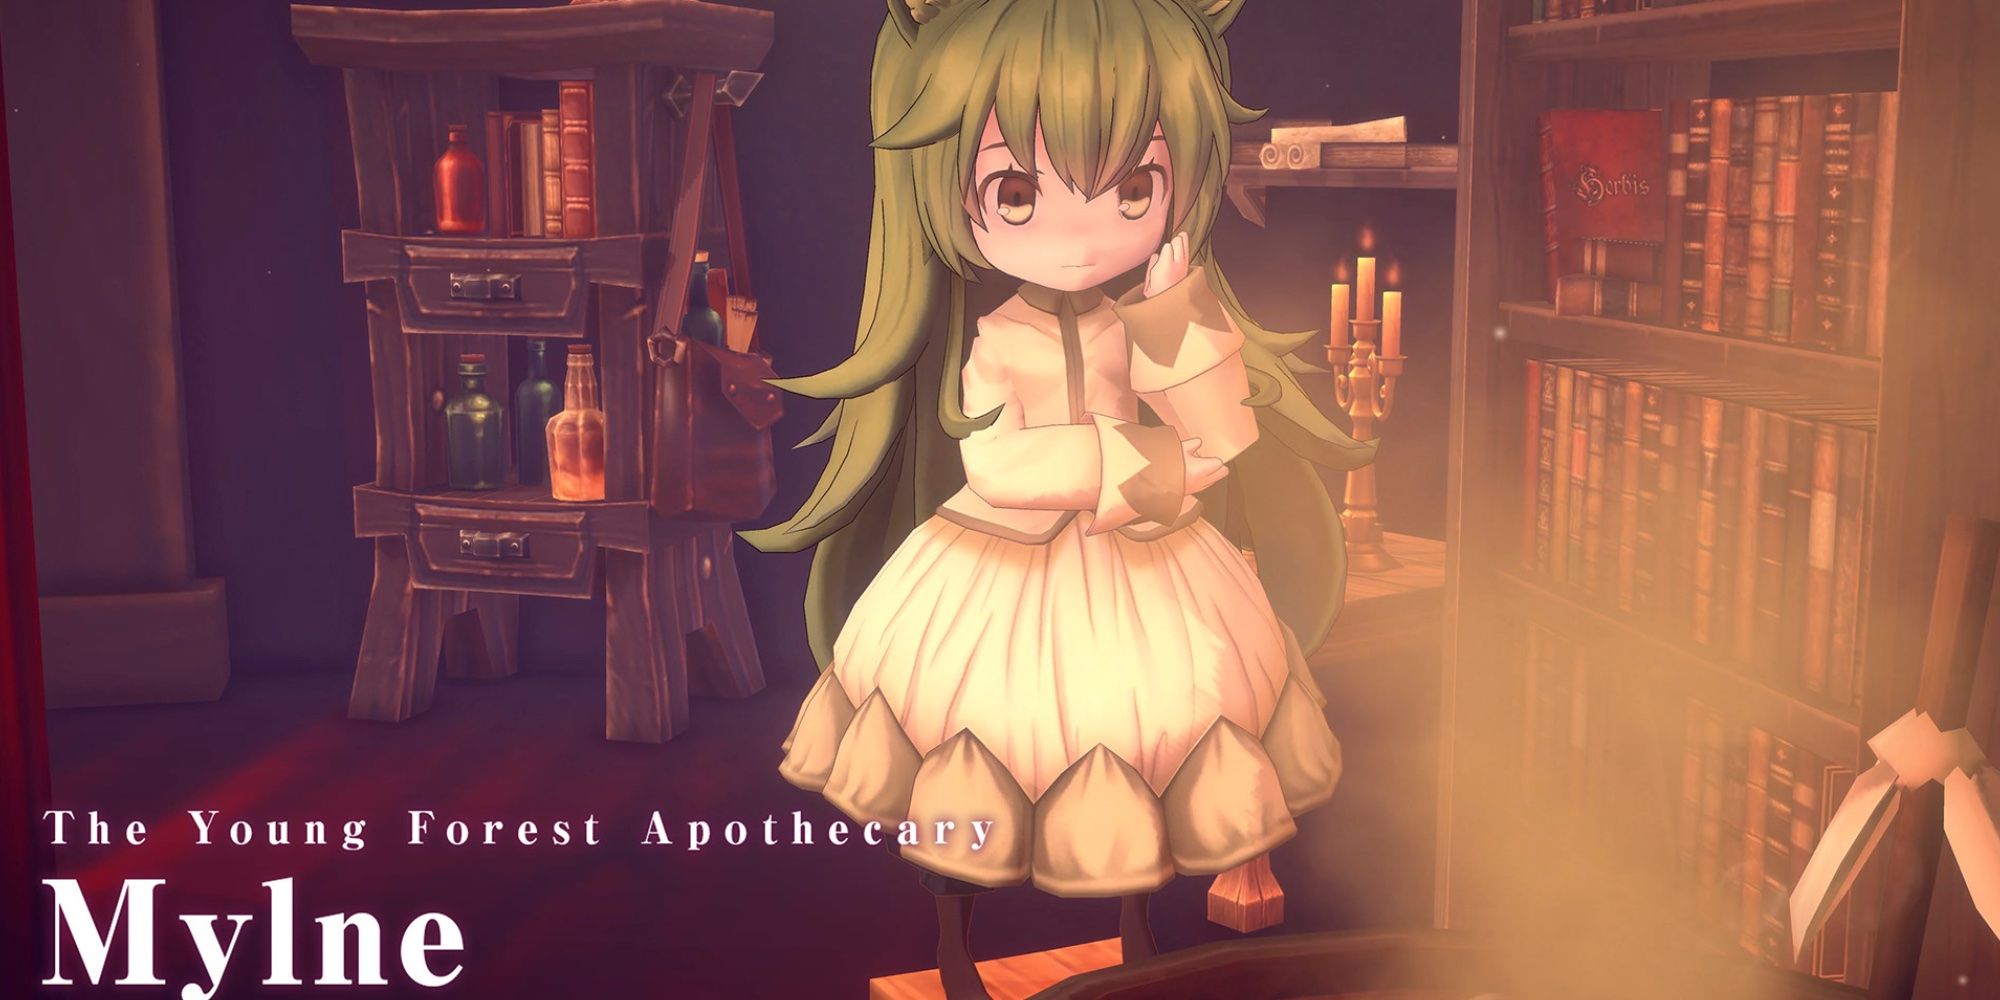 Märchen Forest: Protagonist Mylne at her apothecary